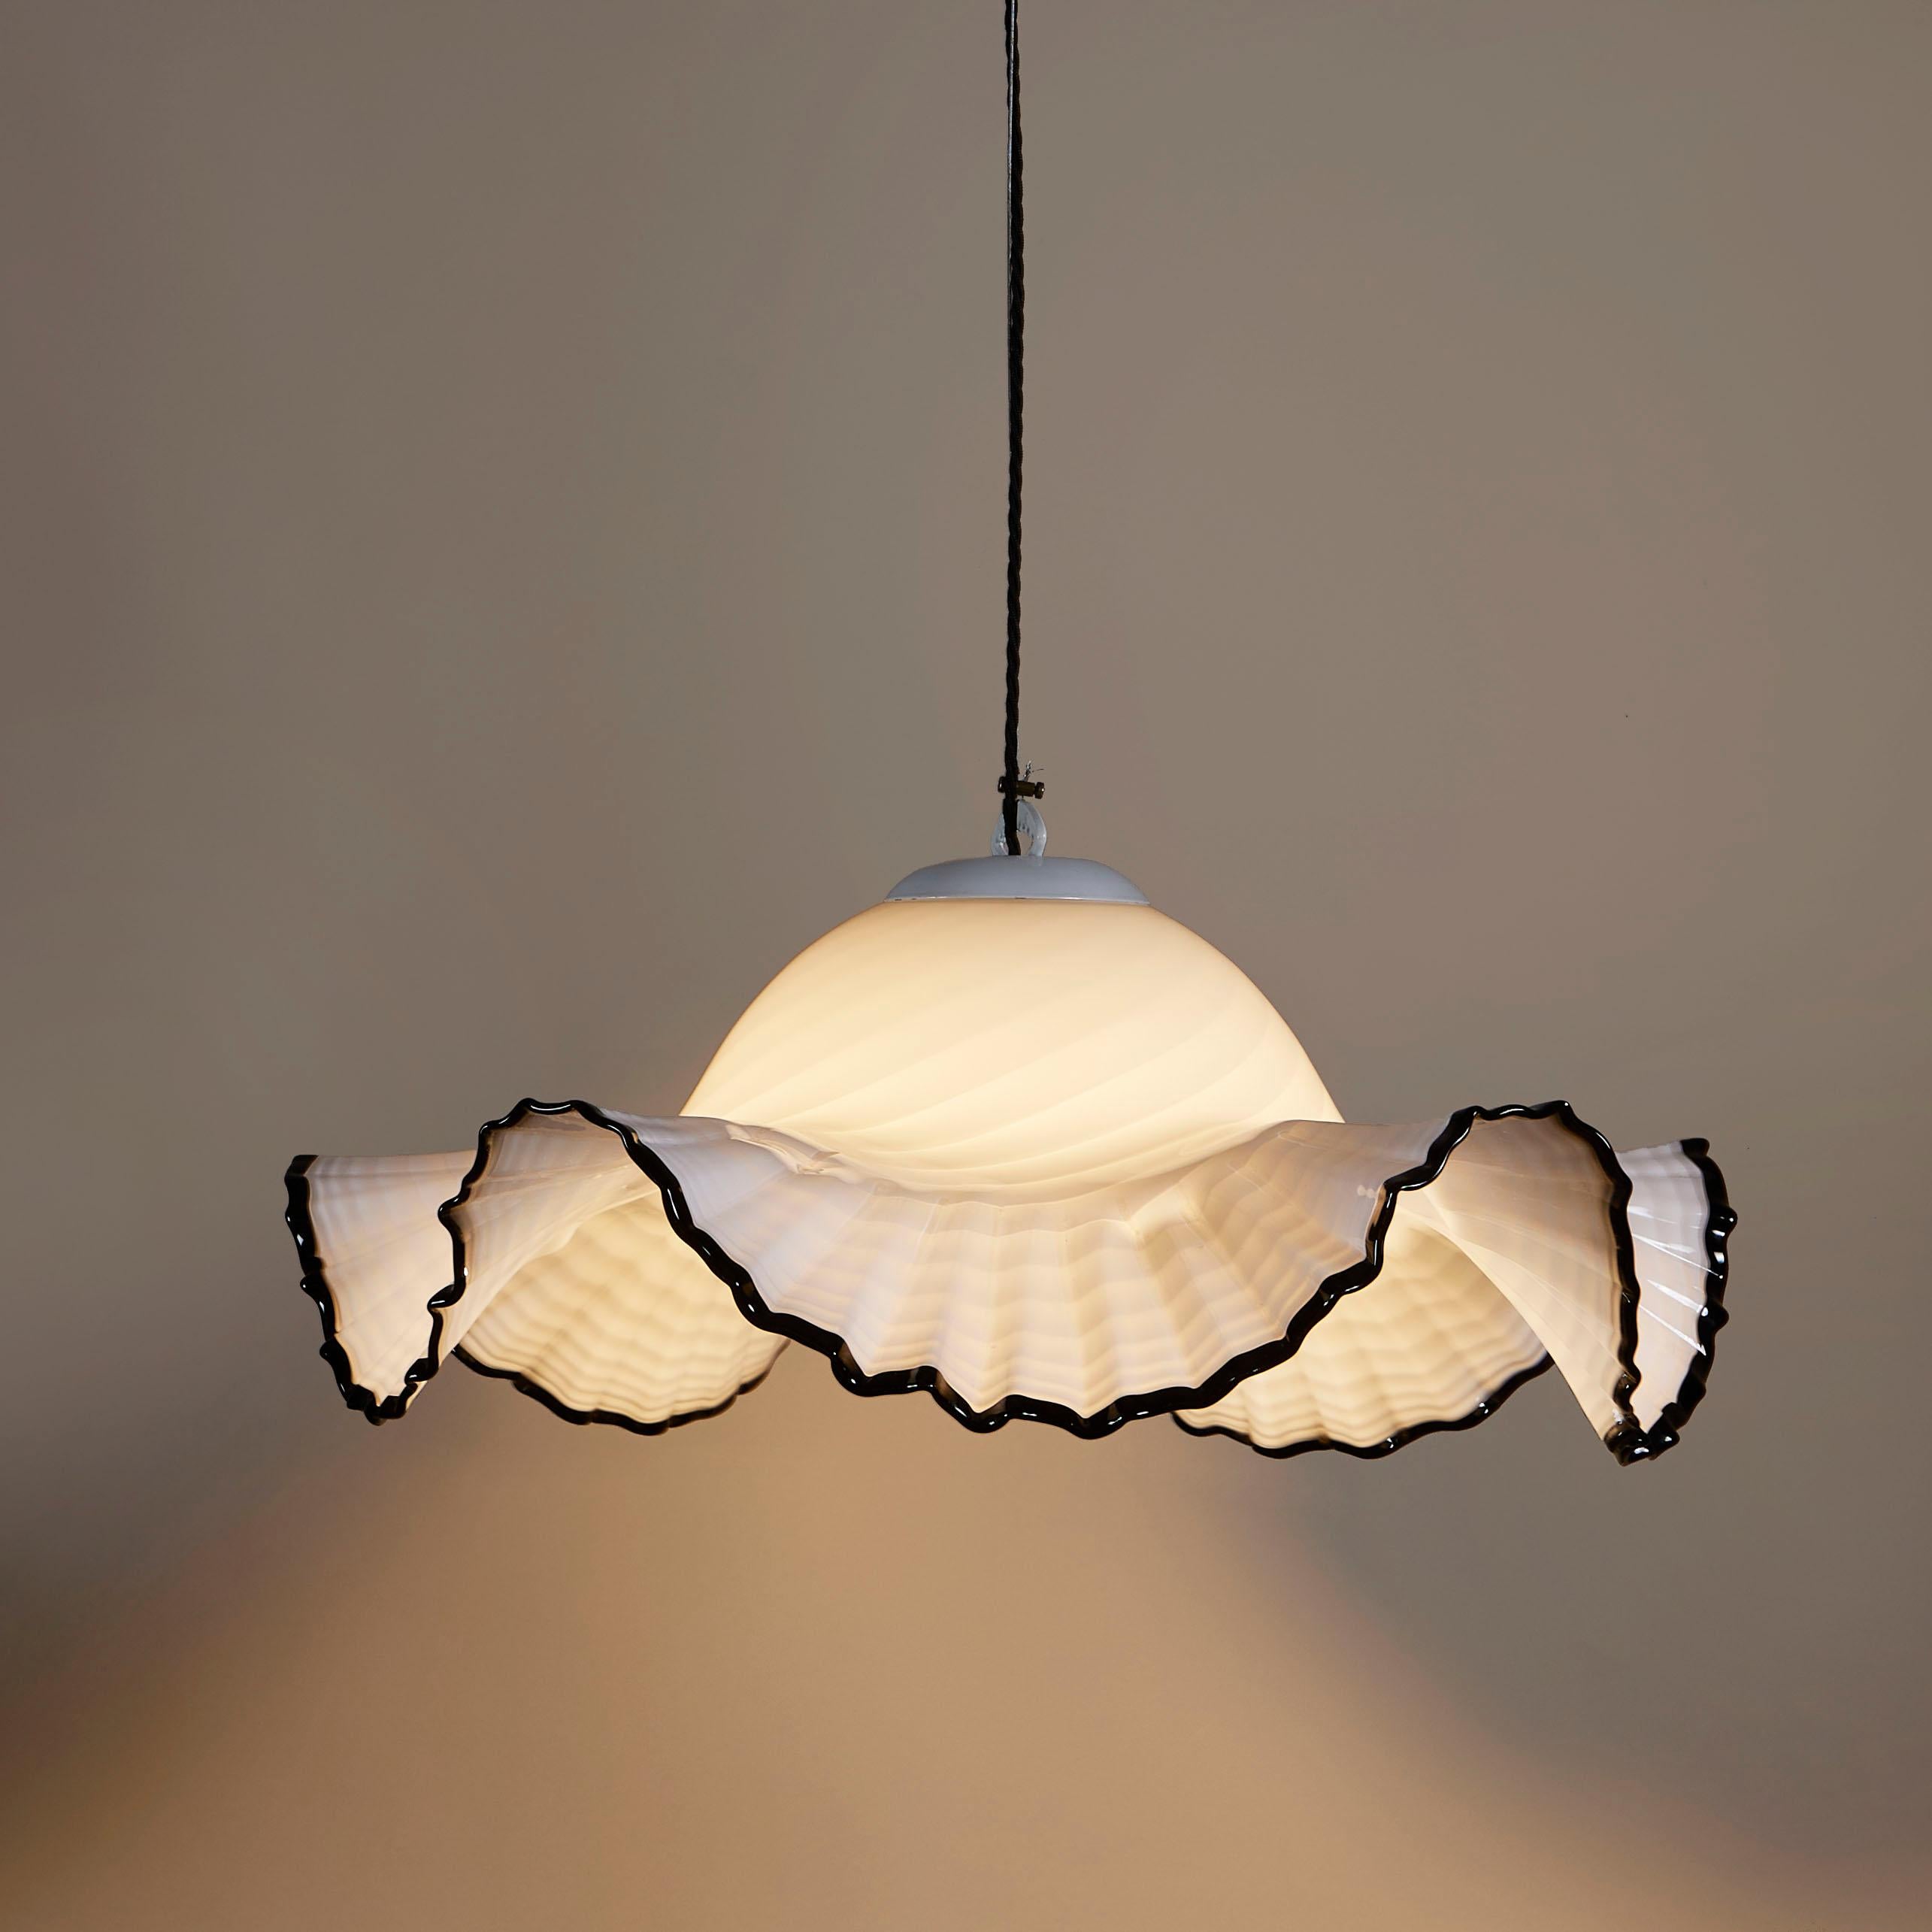 Mid-20th Century Extra large 1960s Murano 'Fazzoletto' frilly white and black ceiling pendant